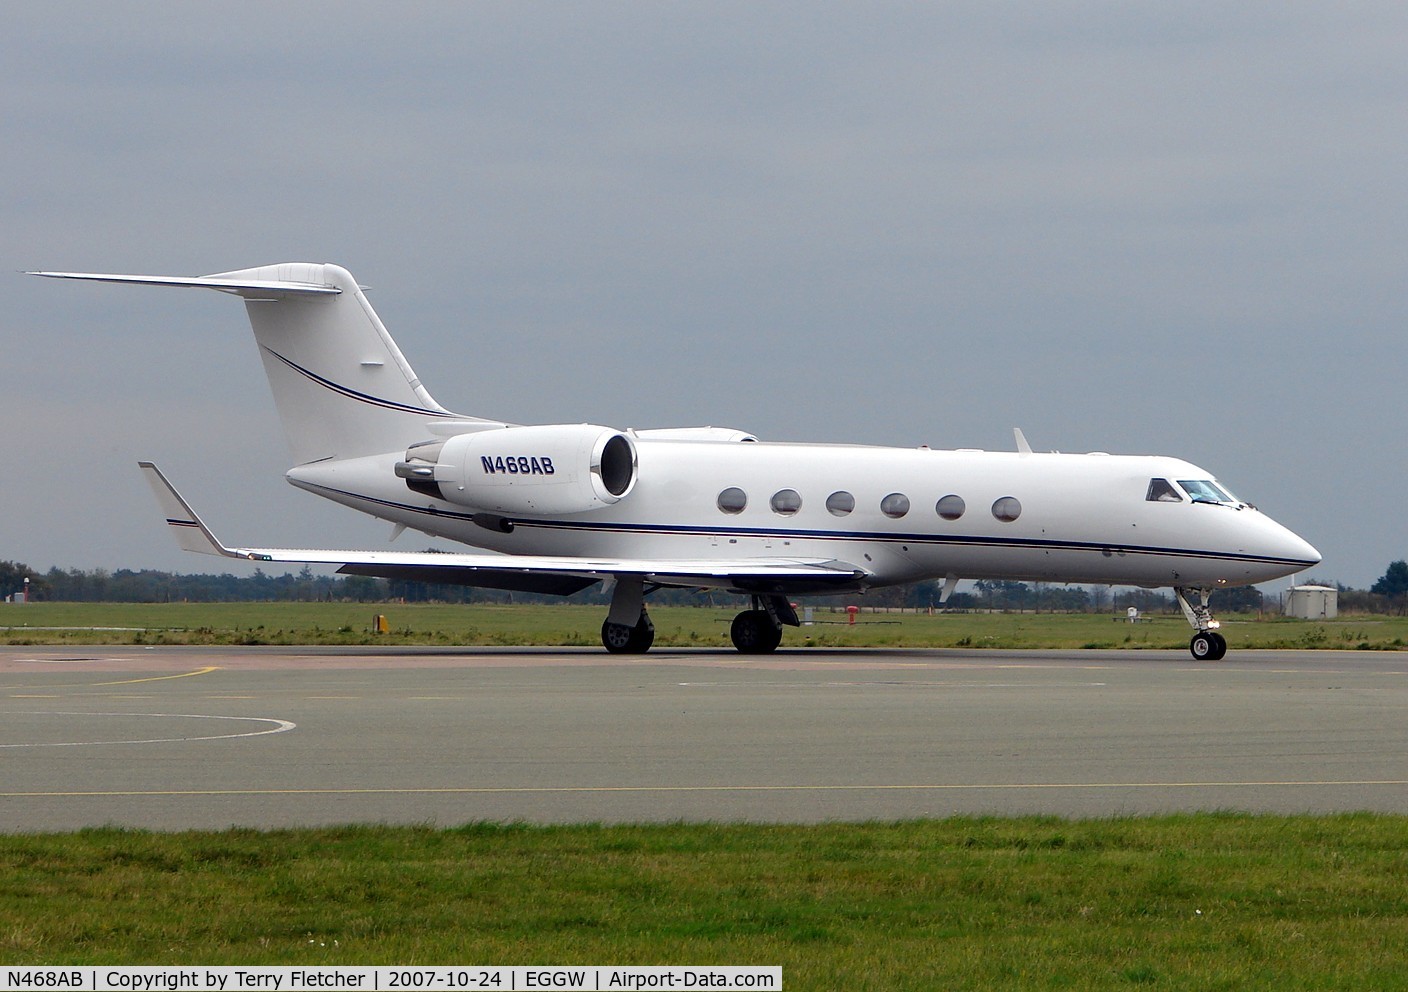 N468AB, 2002 Gulfstream Aerospace G-IV C/N 1477, on a busy day at Luton Airport (UK)